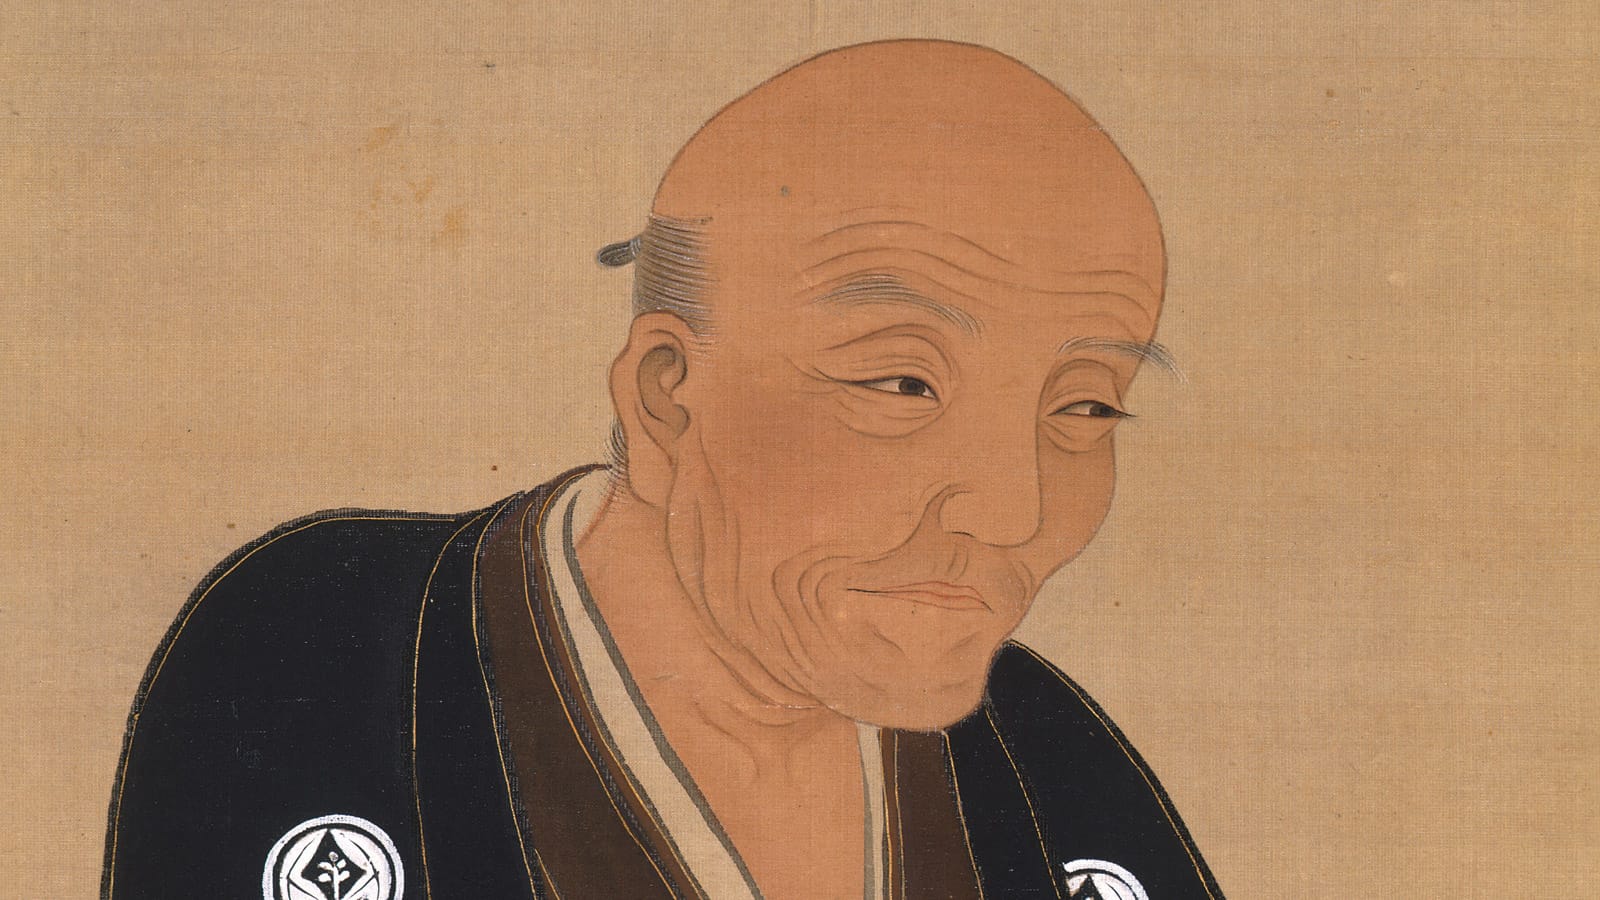 drawing of the Takeda founder